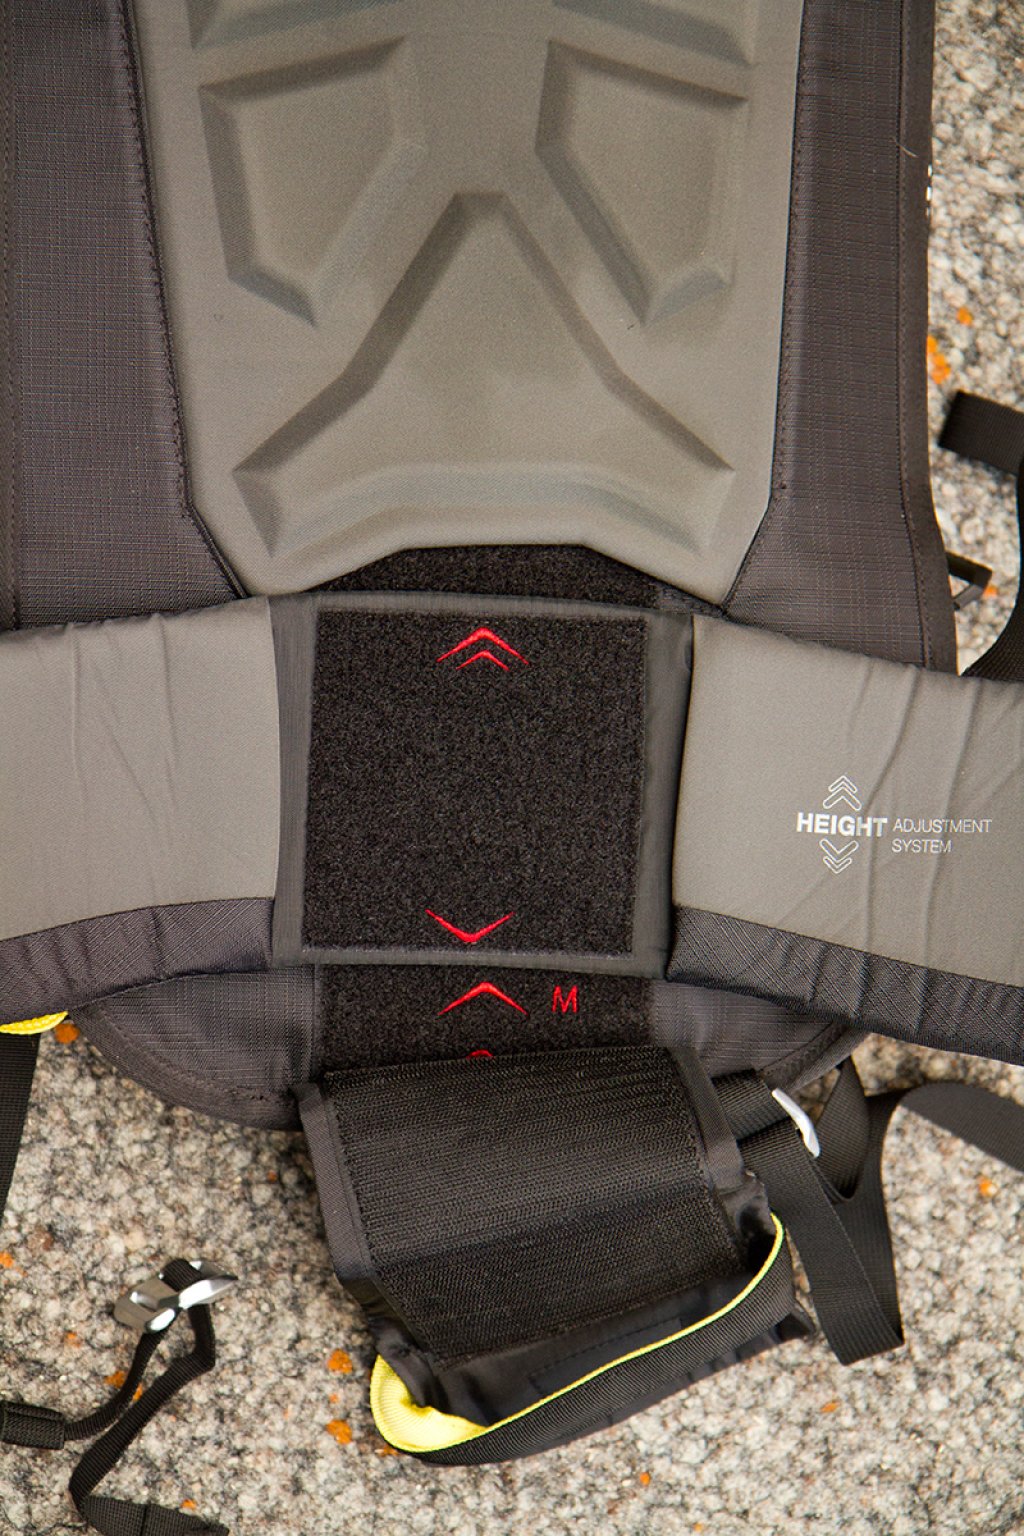 The back length can be infinitely adjusted using Velcro on the hip belt. This is important for the optimum fit of the head airbag. Three size markings are helpful here.